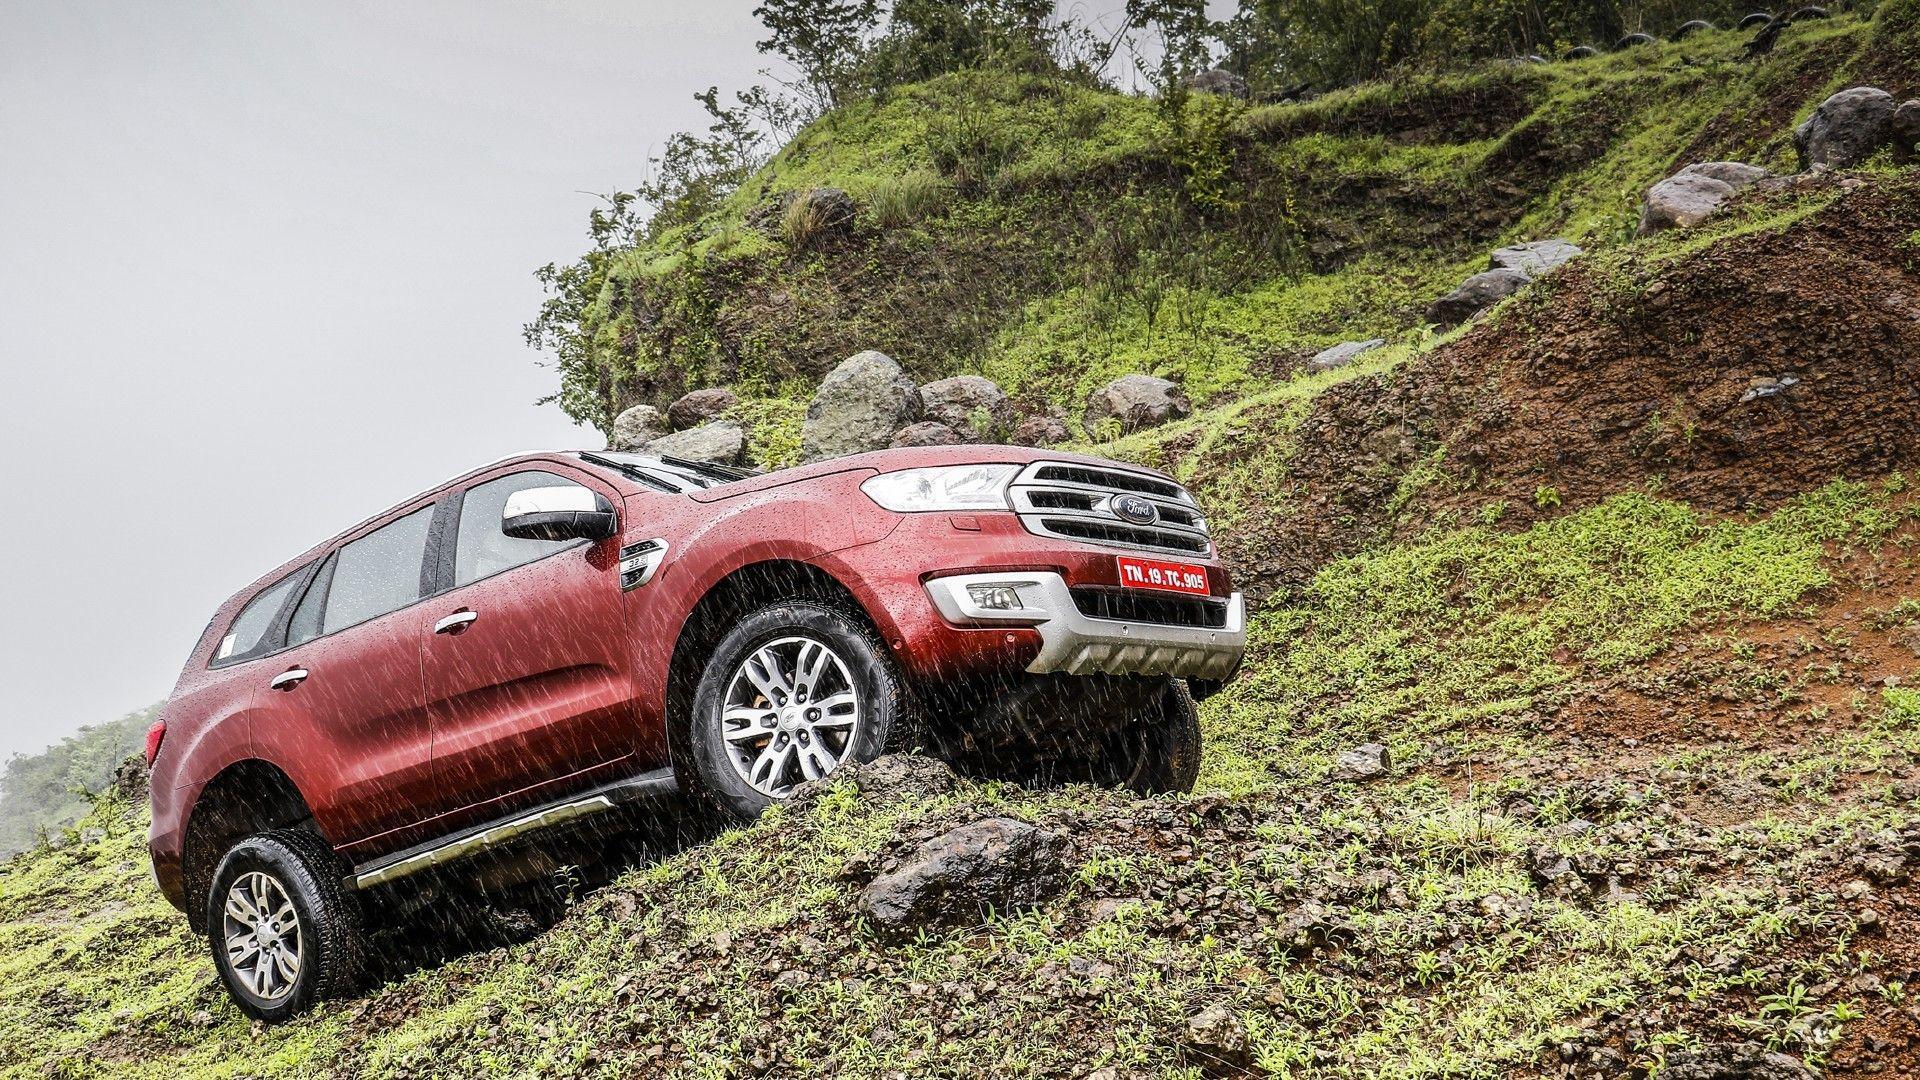 Ford Endeavour Image, Interior & Exterior Photo Gallery